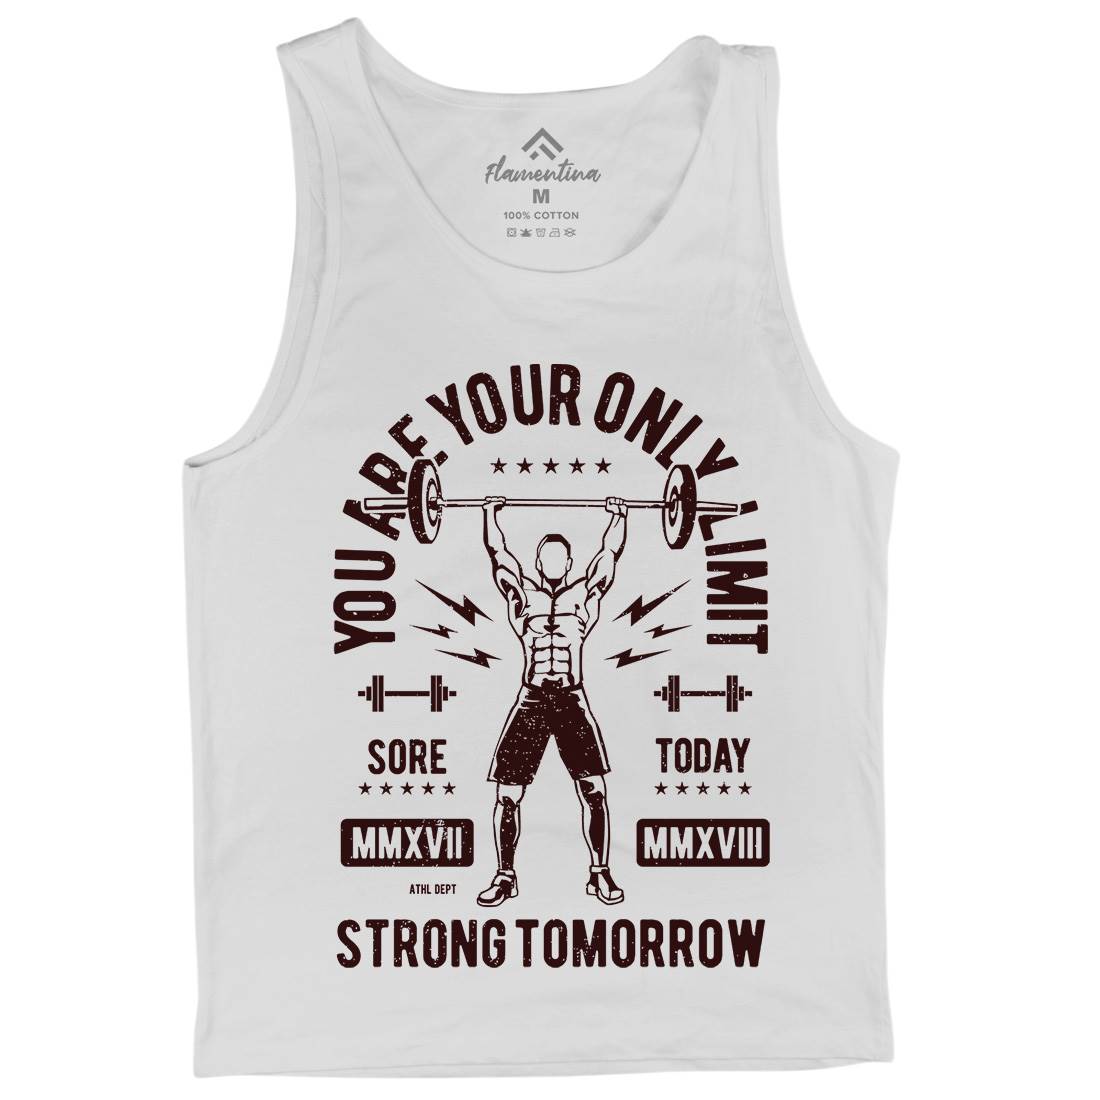 You Are Your Only Limit Mens Tank Top Vest Gym A799